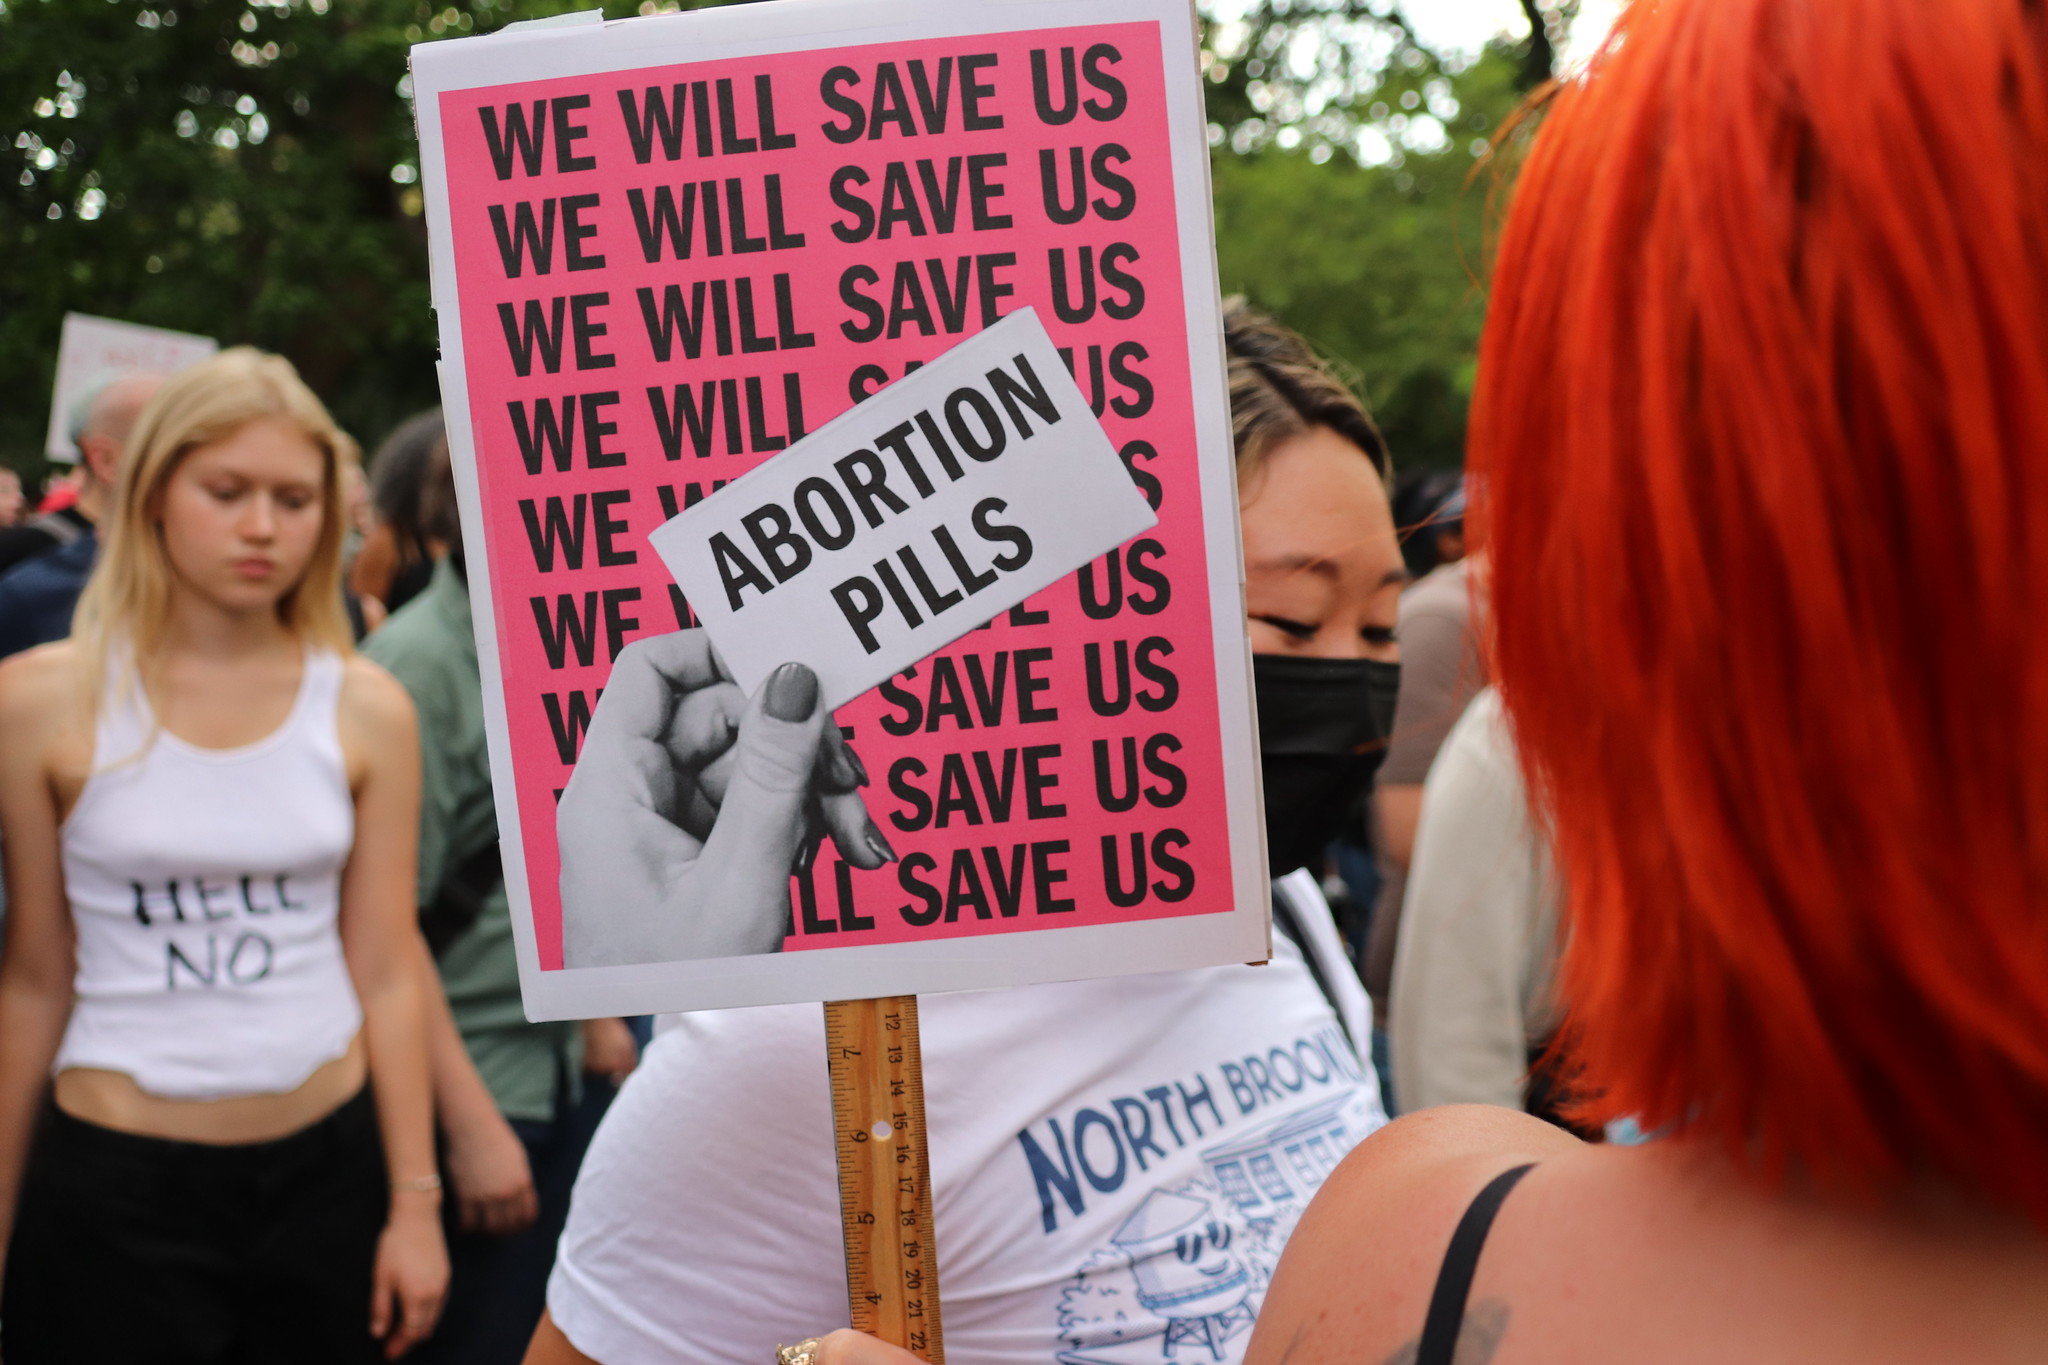 A sign from a reproductive rights protest with text "We will save us" along with a hand holding a card that says, "Abortion Pills."